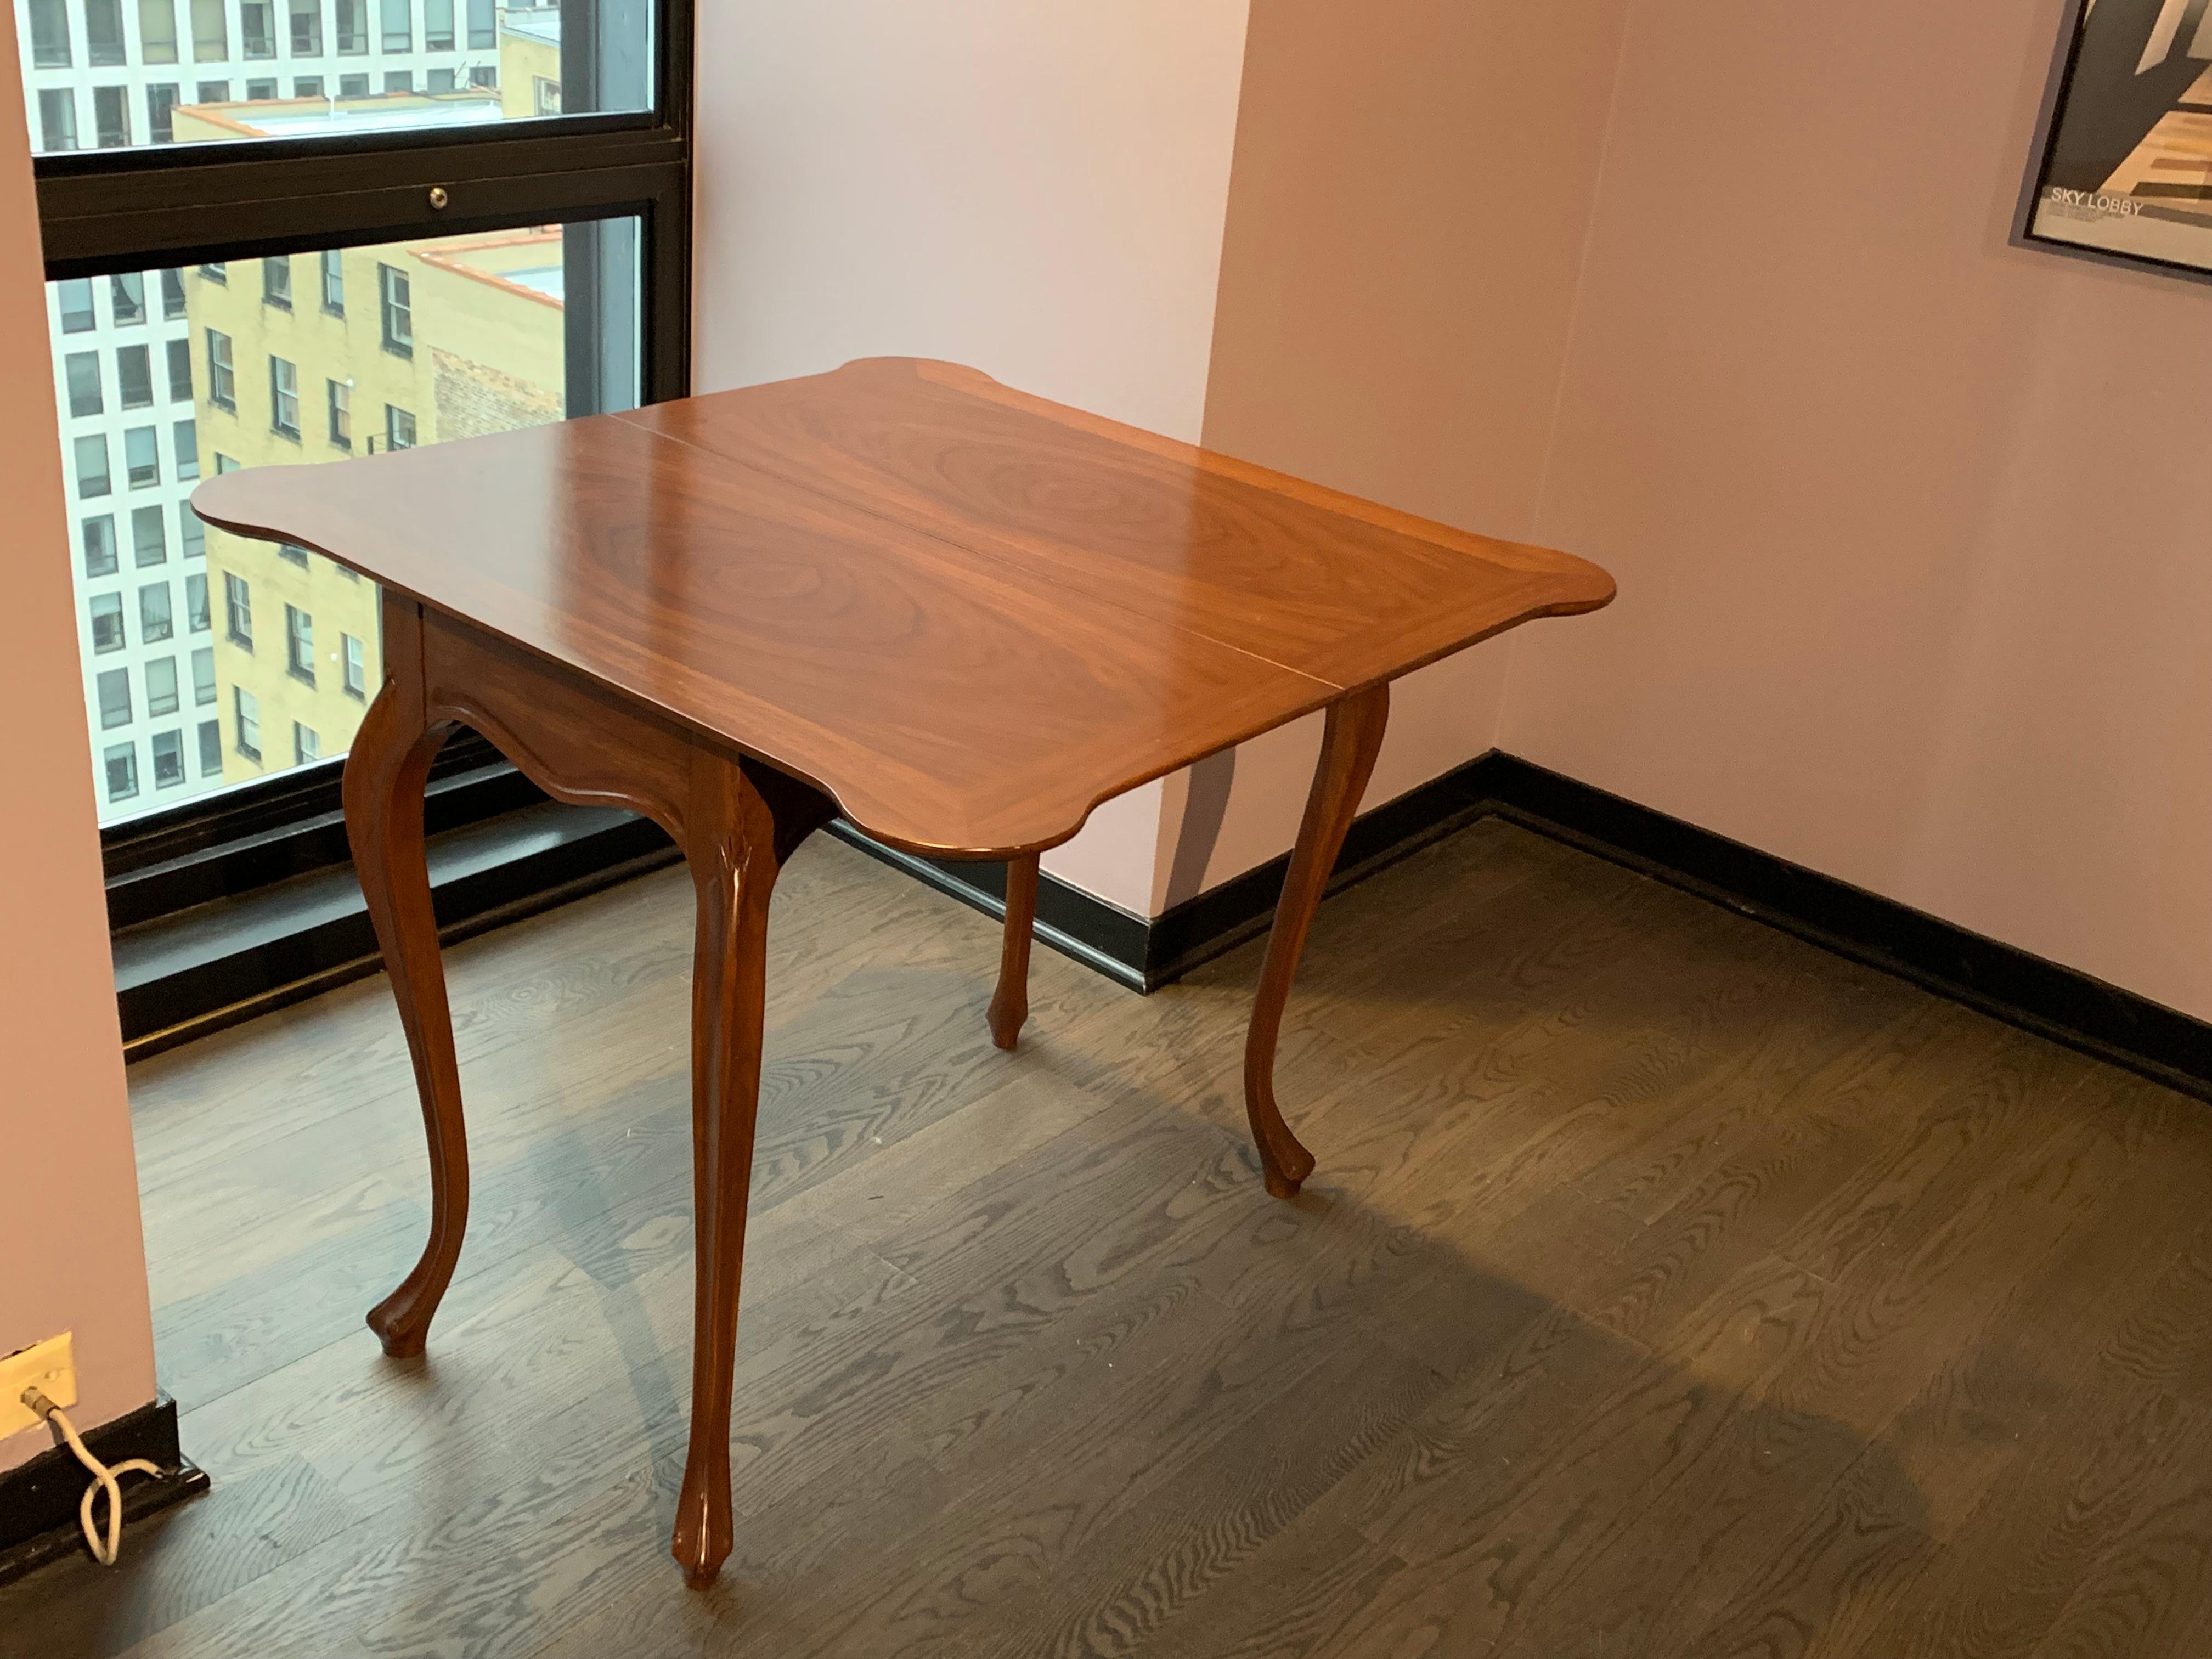 Transitional Burled Wood Flip-Top Convertible Console or Dining Table In Good Condition For Sale In Chicago, IL